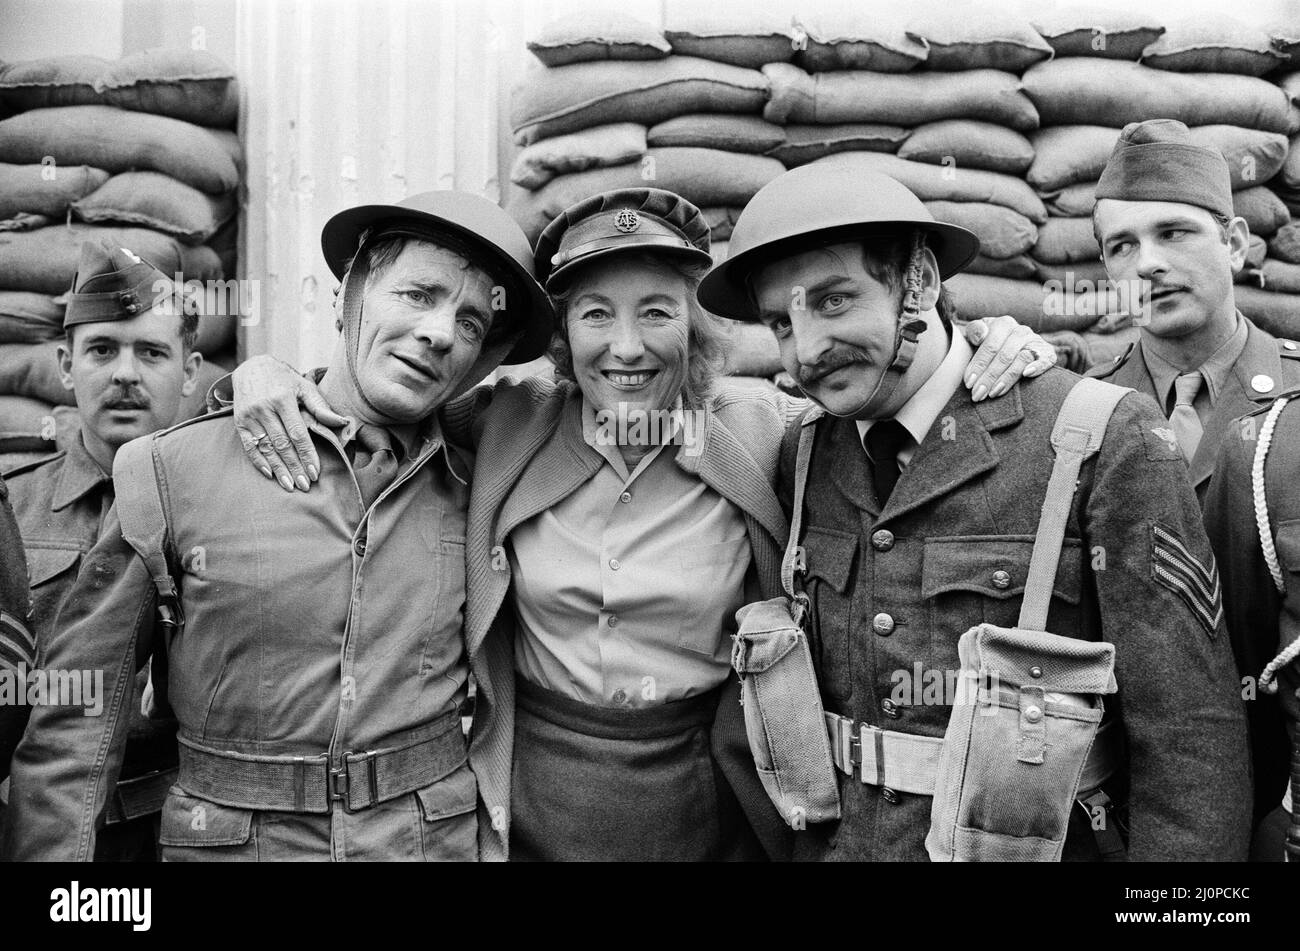 Dame Vera Lynn will appear at the Lyceum in 'Stage Door Canteen' to celebrate the 40th Anniversary of D Day. The front is sandbagged and Vera was wearing World War Two uniform for the photocall, she is pictured with some of the troops outside the theatre. 3rd June 1984. Stock Photo